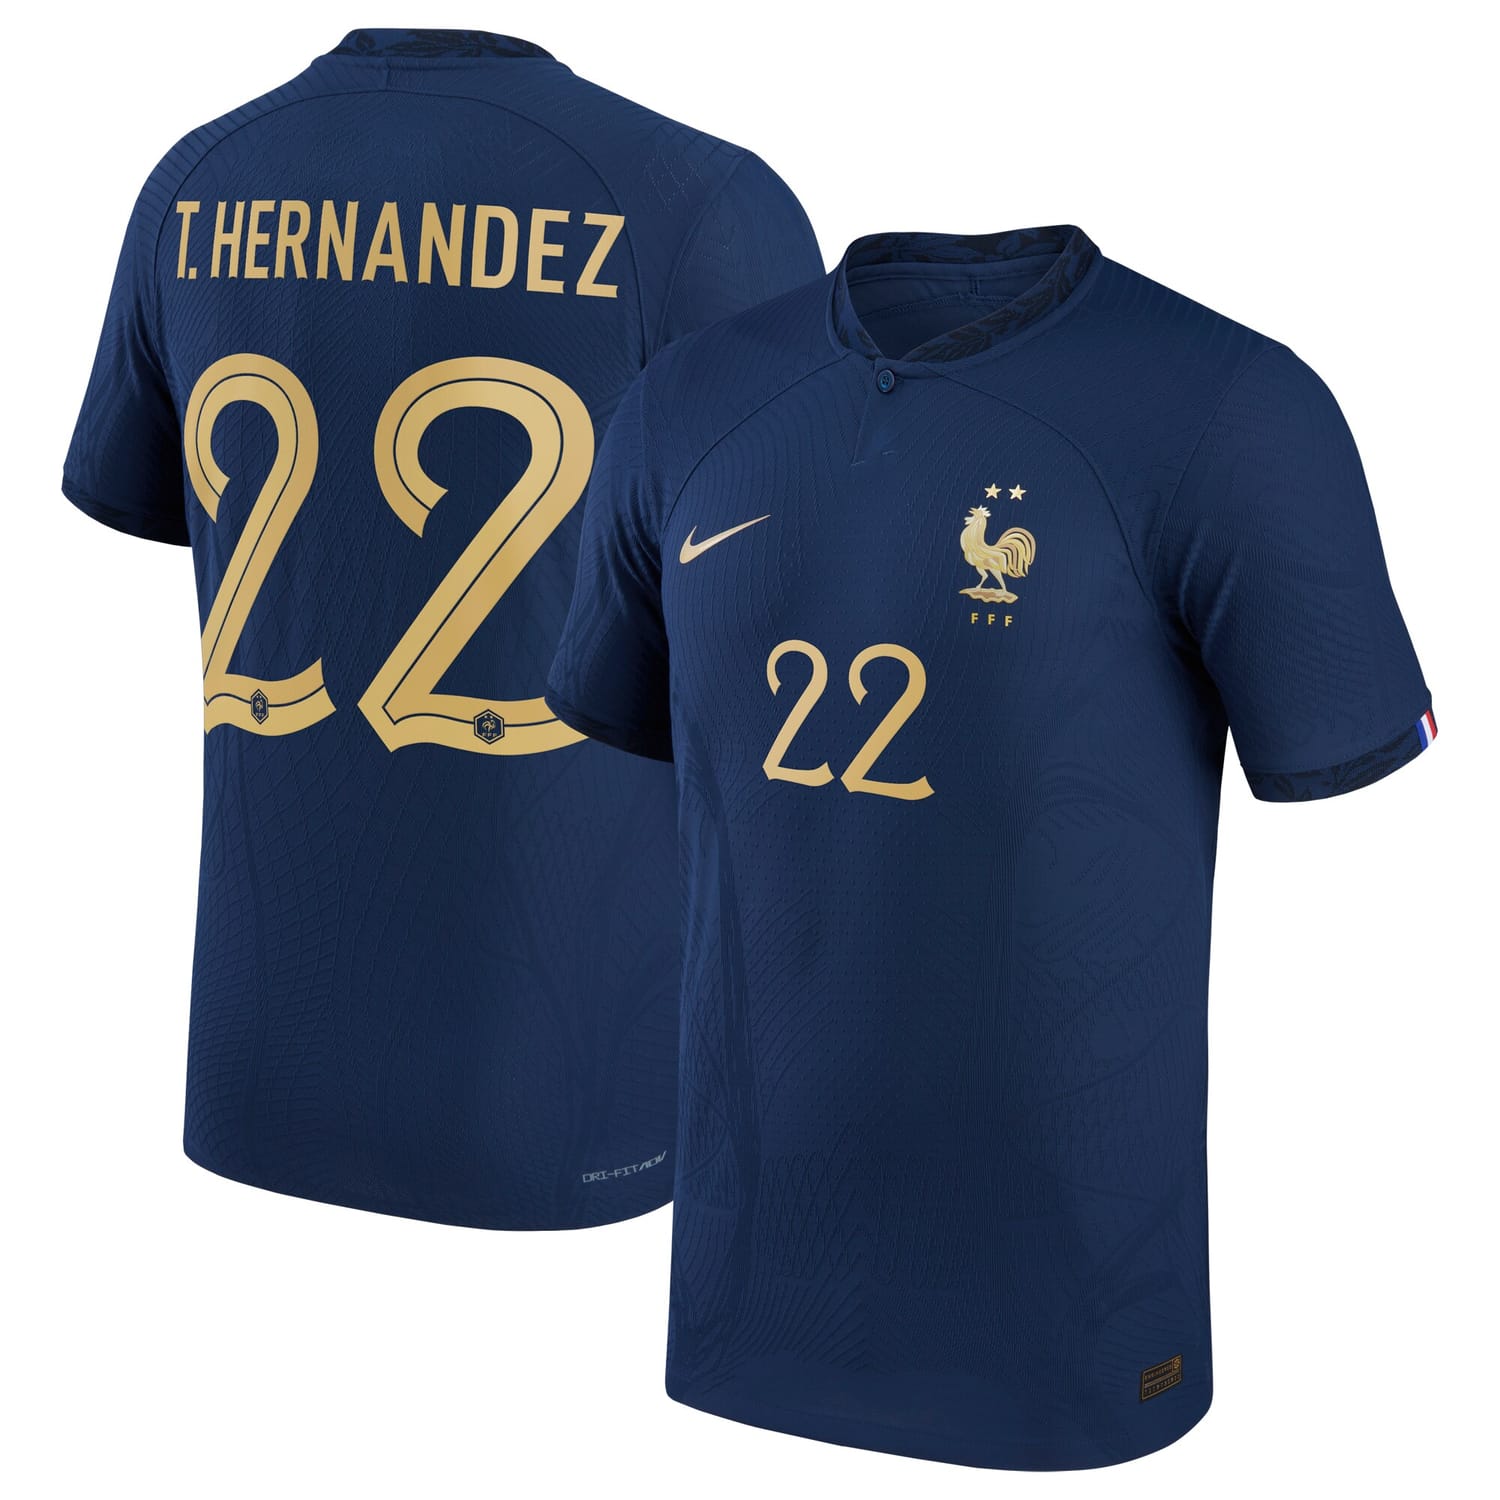 France National Team Home Authentic Jersey Shirt 2022 player Theo Hernández 22 printing for Men